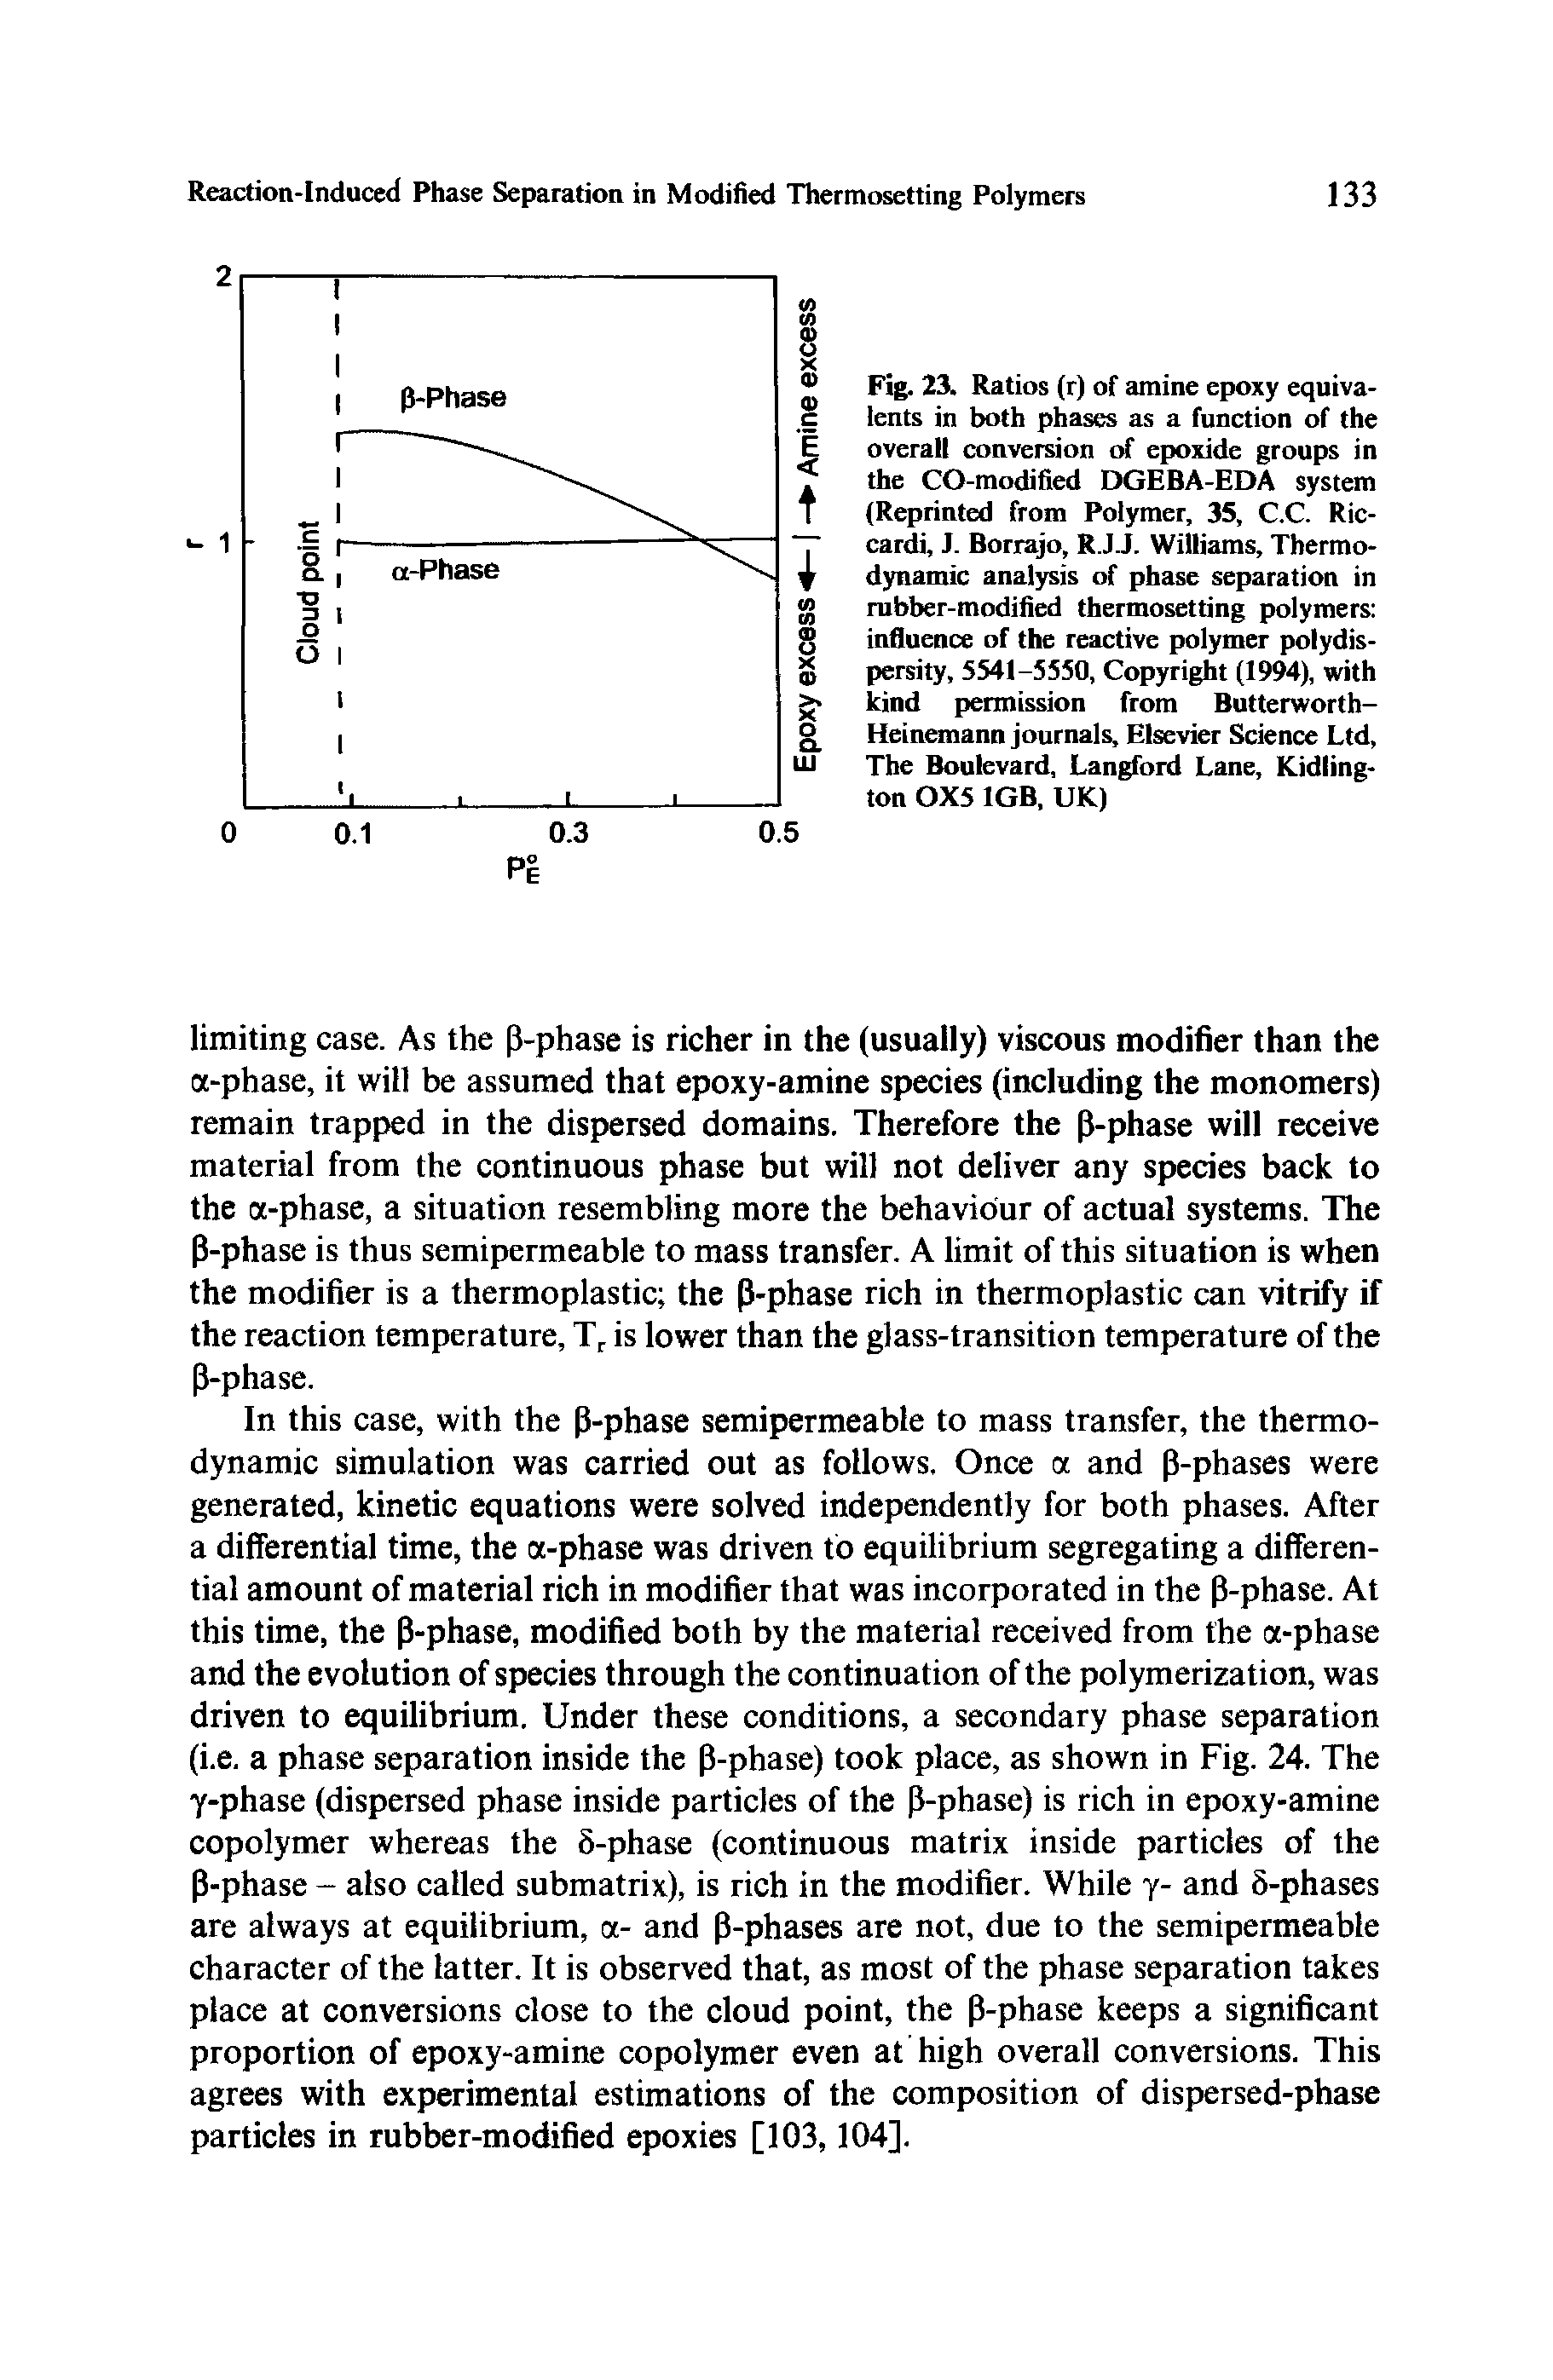 Fig. 23. Ratios (r) of amine epoxy equivalents in both phases as a function of the overall conversion of epoxide groups in the CO-modified DGEBA-EDA system (Reprinted from Polymer, 35, C.C. Ric-cardi, J. Borrajo, R.J J. Williams, Thermodynamic analysis of phase separation in rubber-modified thermosetting polymers influence of the reactive polymer polydis-persity, 5541-5550, Copyright (1994), with kind permission from Butterworth-Heinemann journals, Elsevier Science Ltd, The Boulevard, Langford Lane, Kidling-ton 0X5 1GB, UK)...